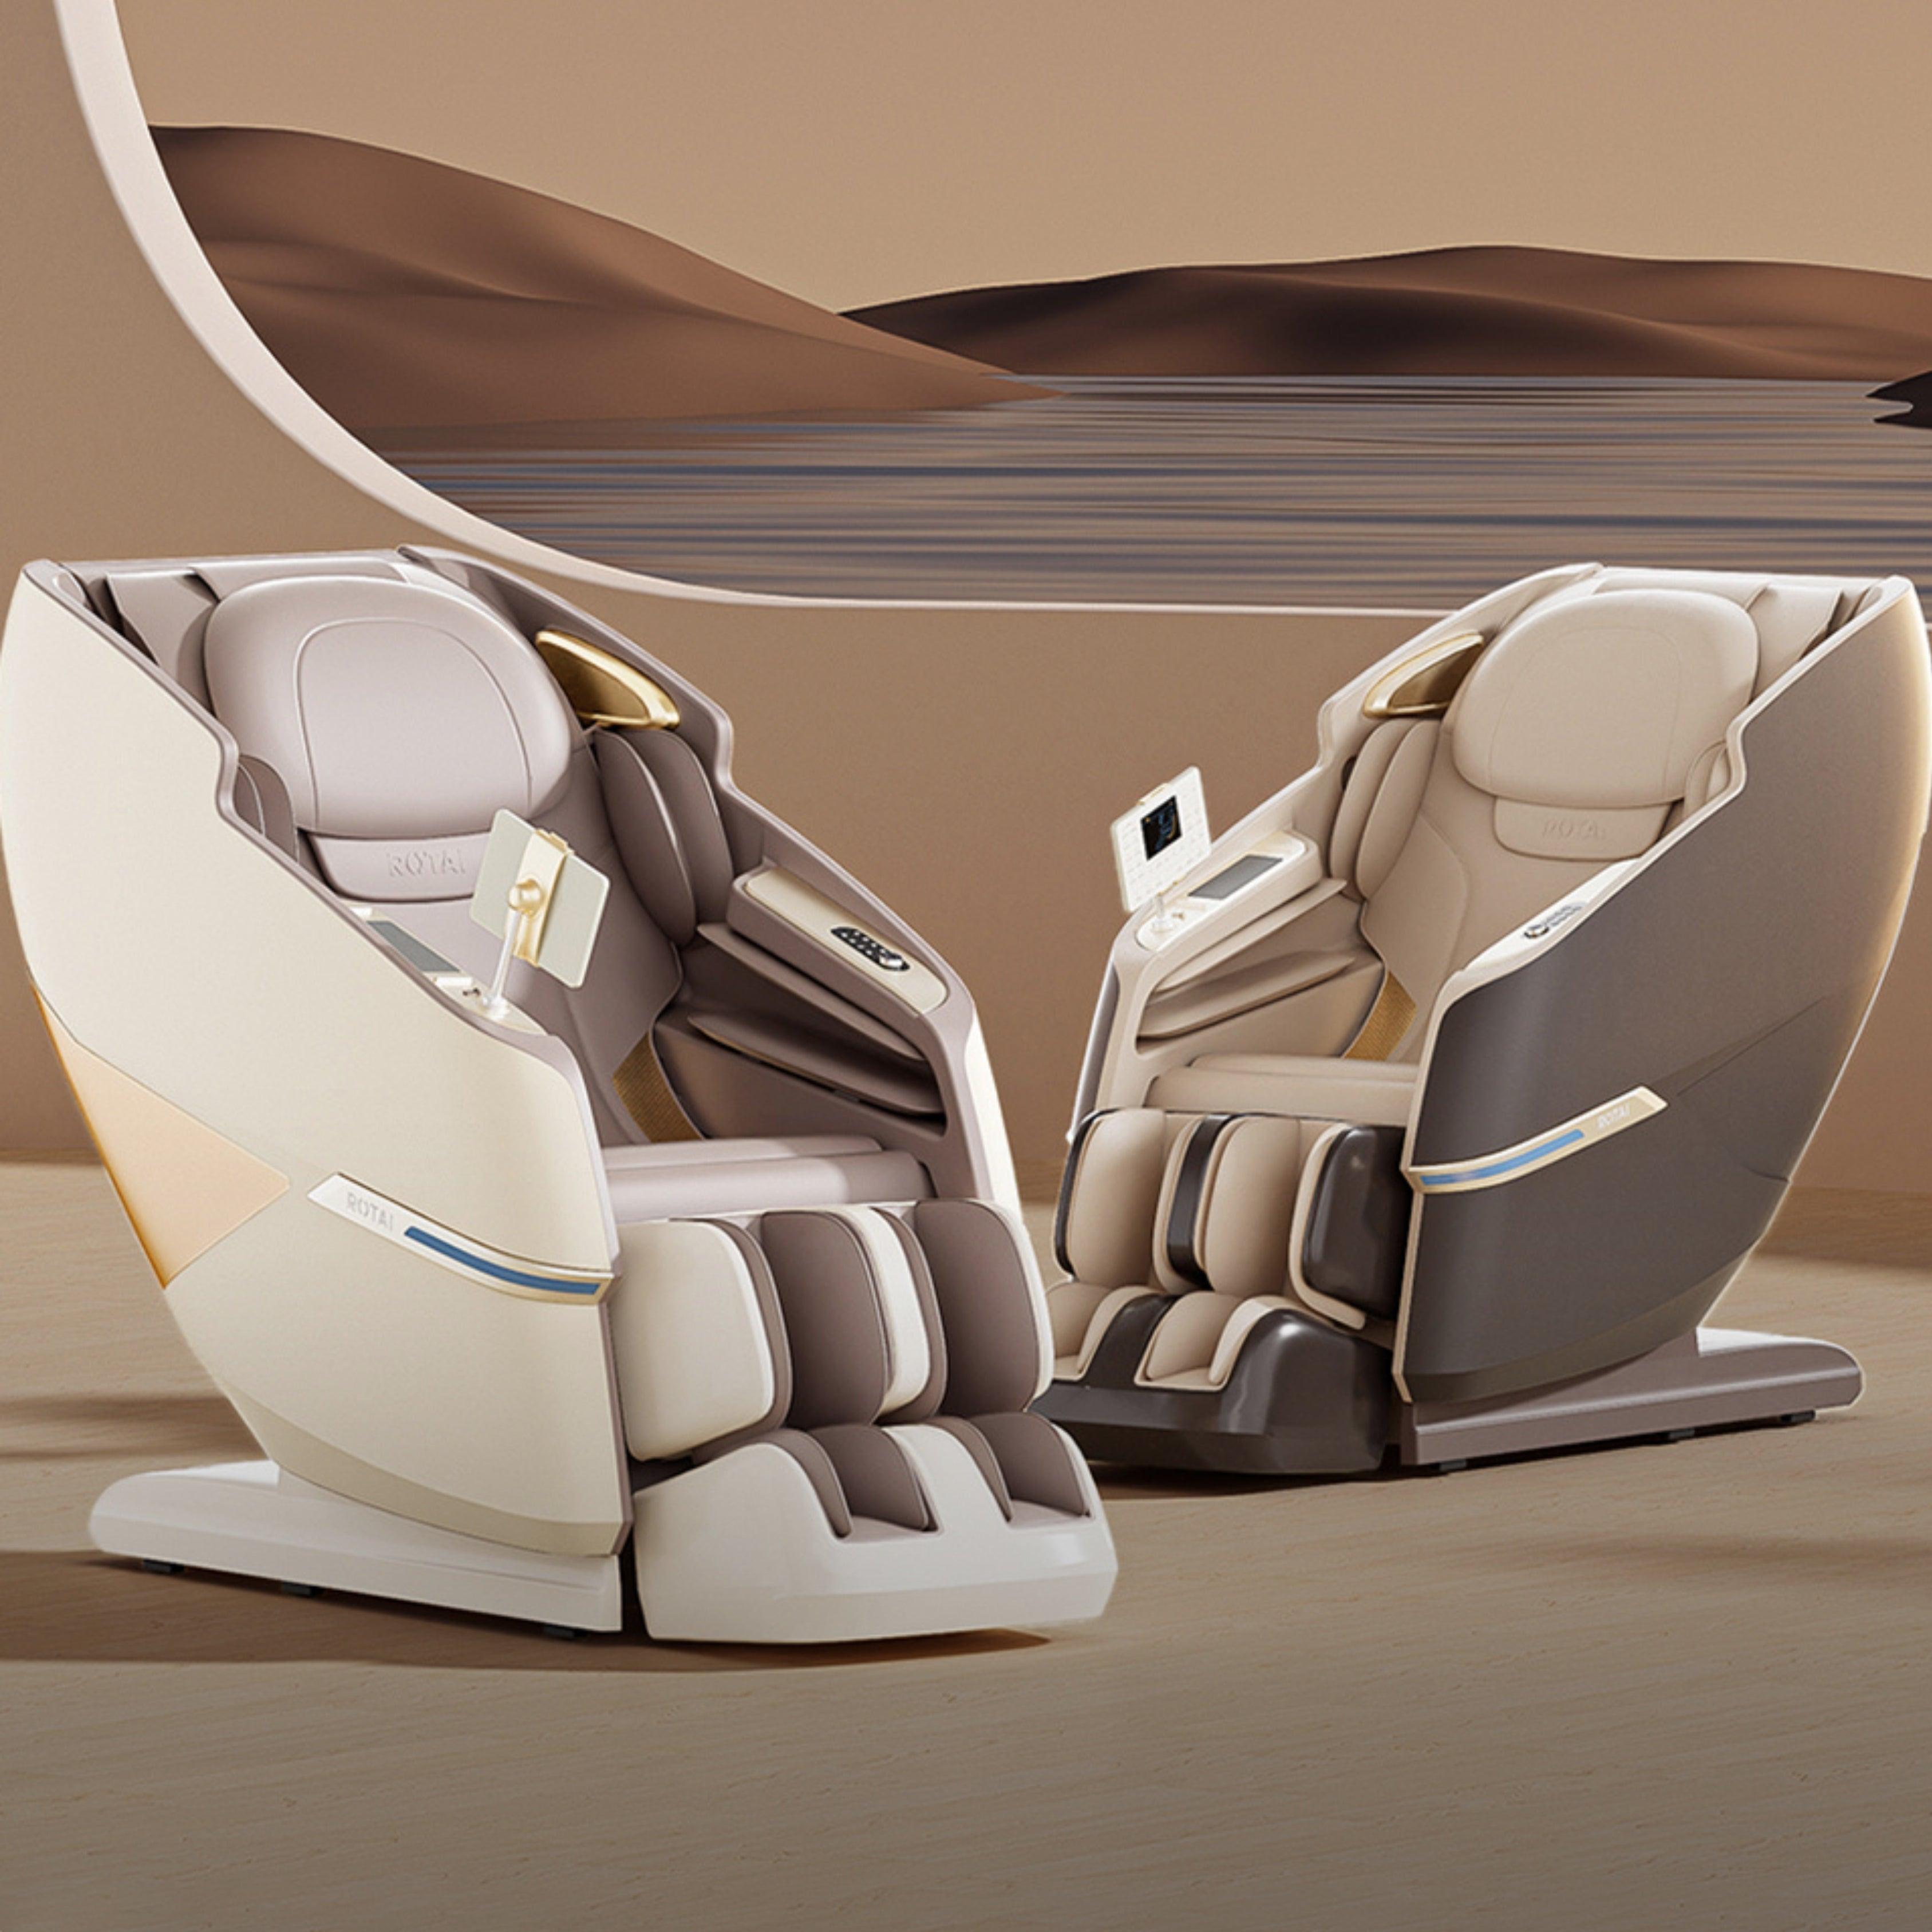 Best massage chair UAE - Royal Majestic Pro Massage Chair in brown with 3D movement and AI smart massage technology for ultimate relaxation. best massage chair uae, massage chair Dubai, massage chair uae, massage chair Saudi Arabia, كرسي التدليك, Best mas